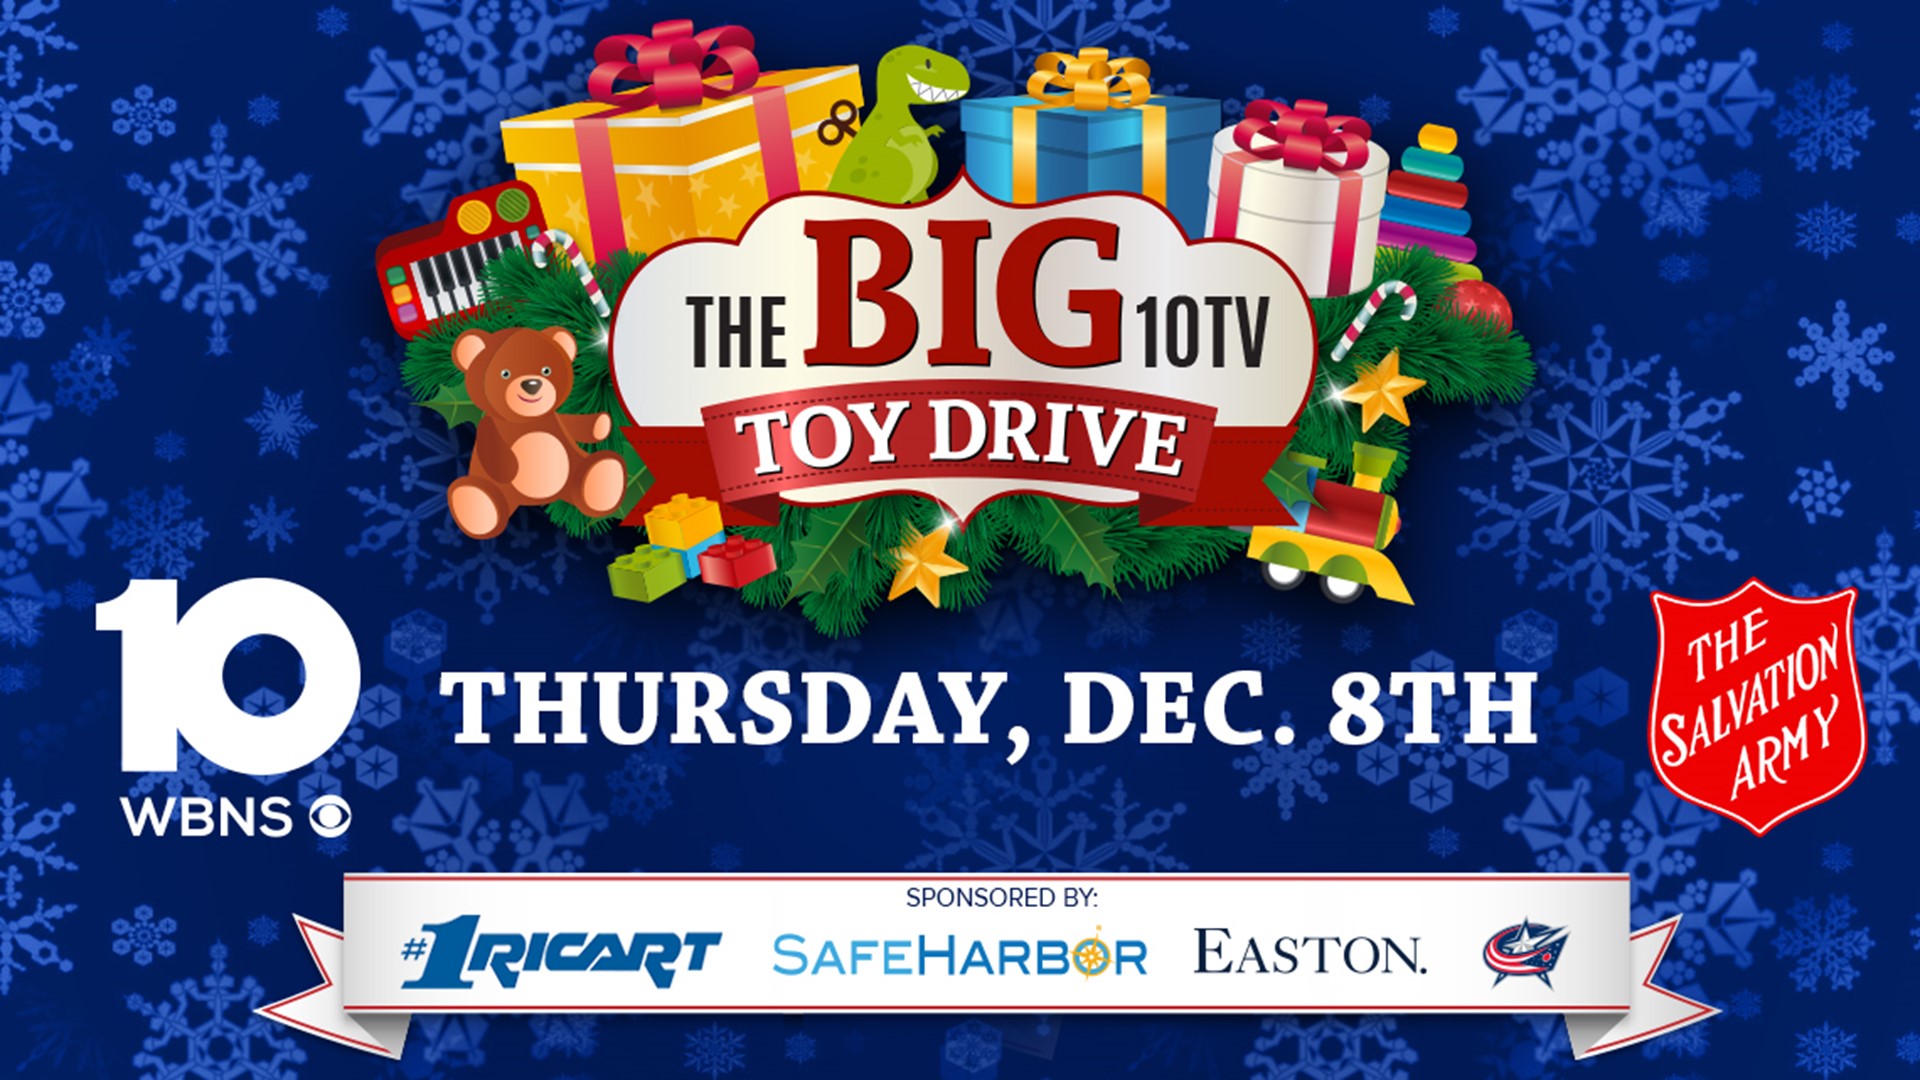 The Big 10TV Toy Drive supports the Salvation Army's Christmas Cheer program, a true holiday experience for families that may need a little help this time of year.